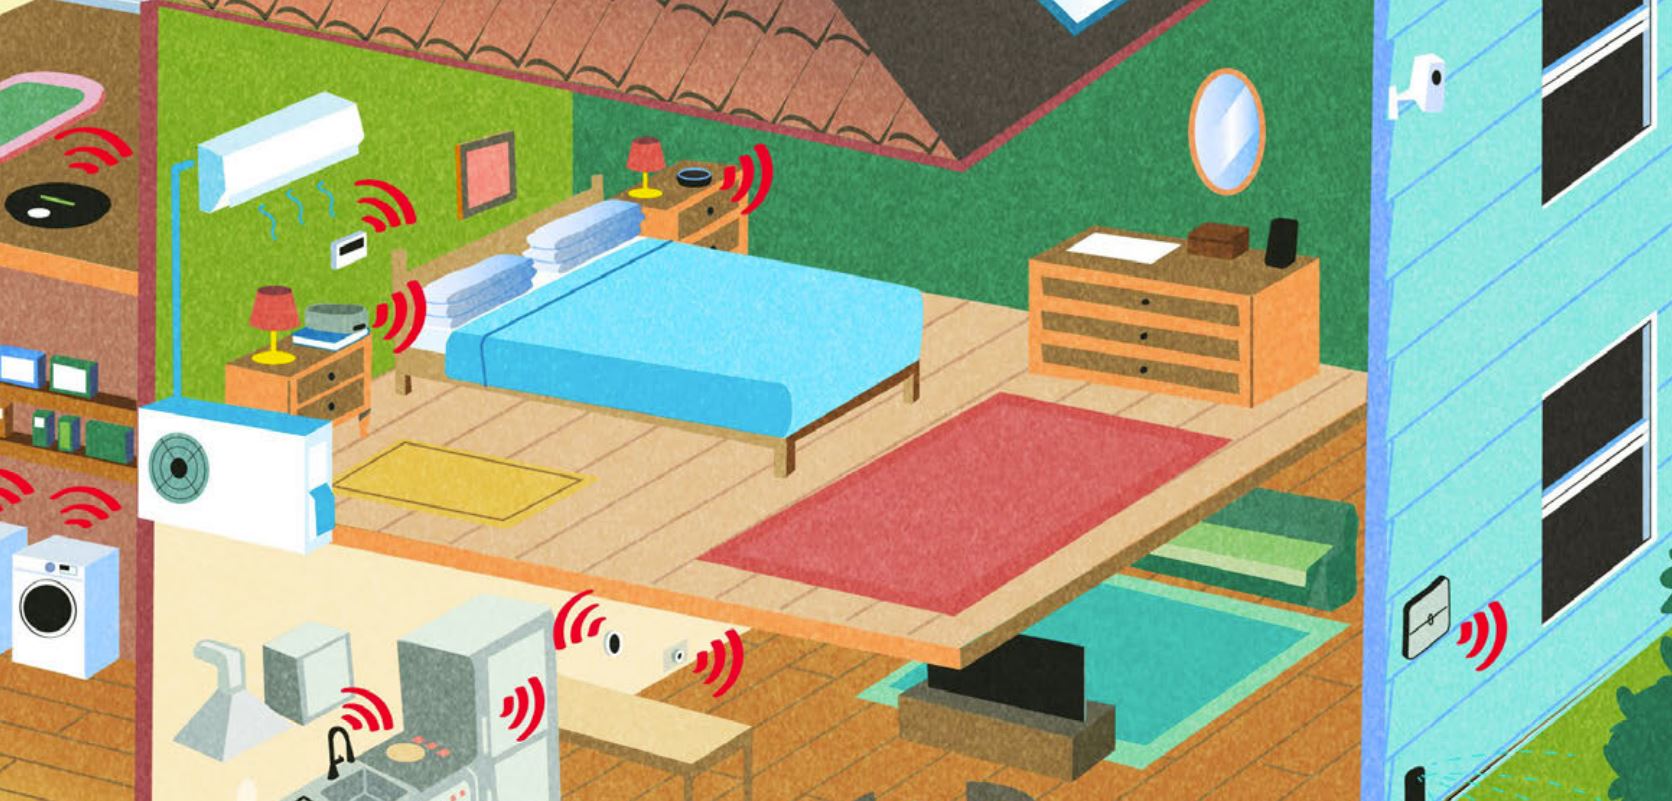 3 Must-Have Smart Home Gadgets